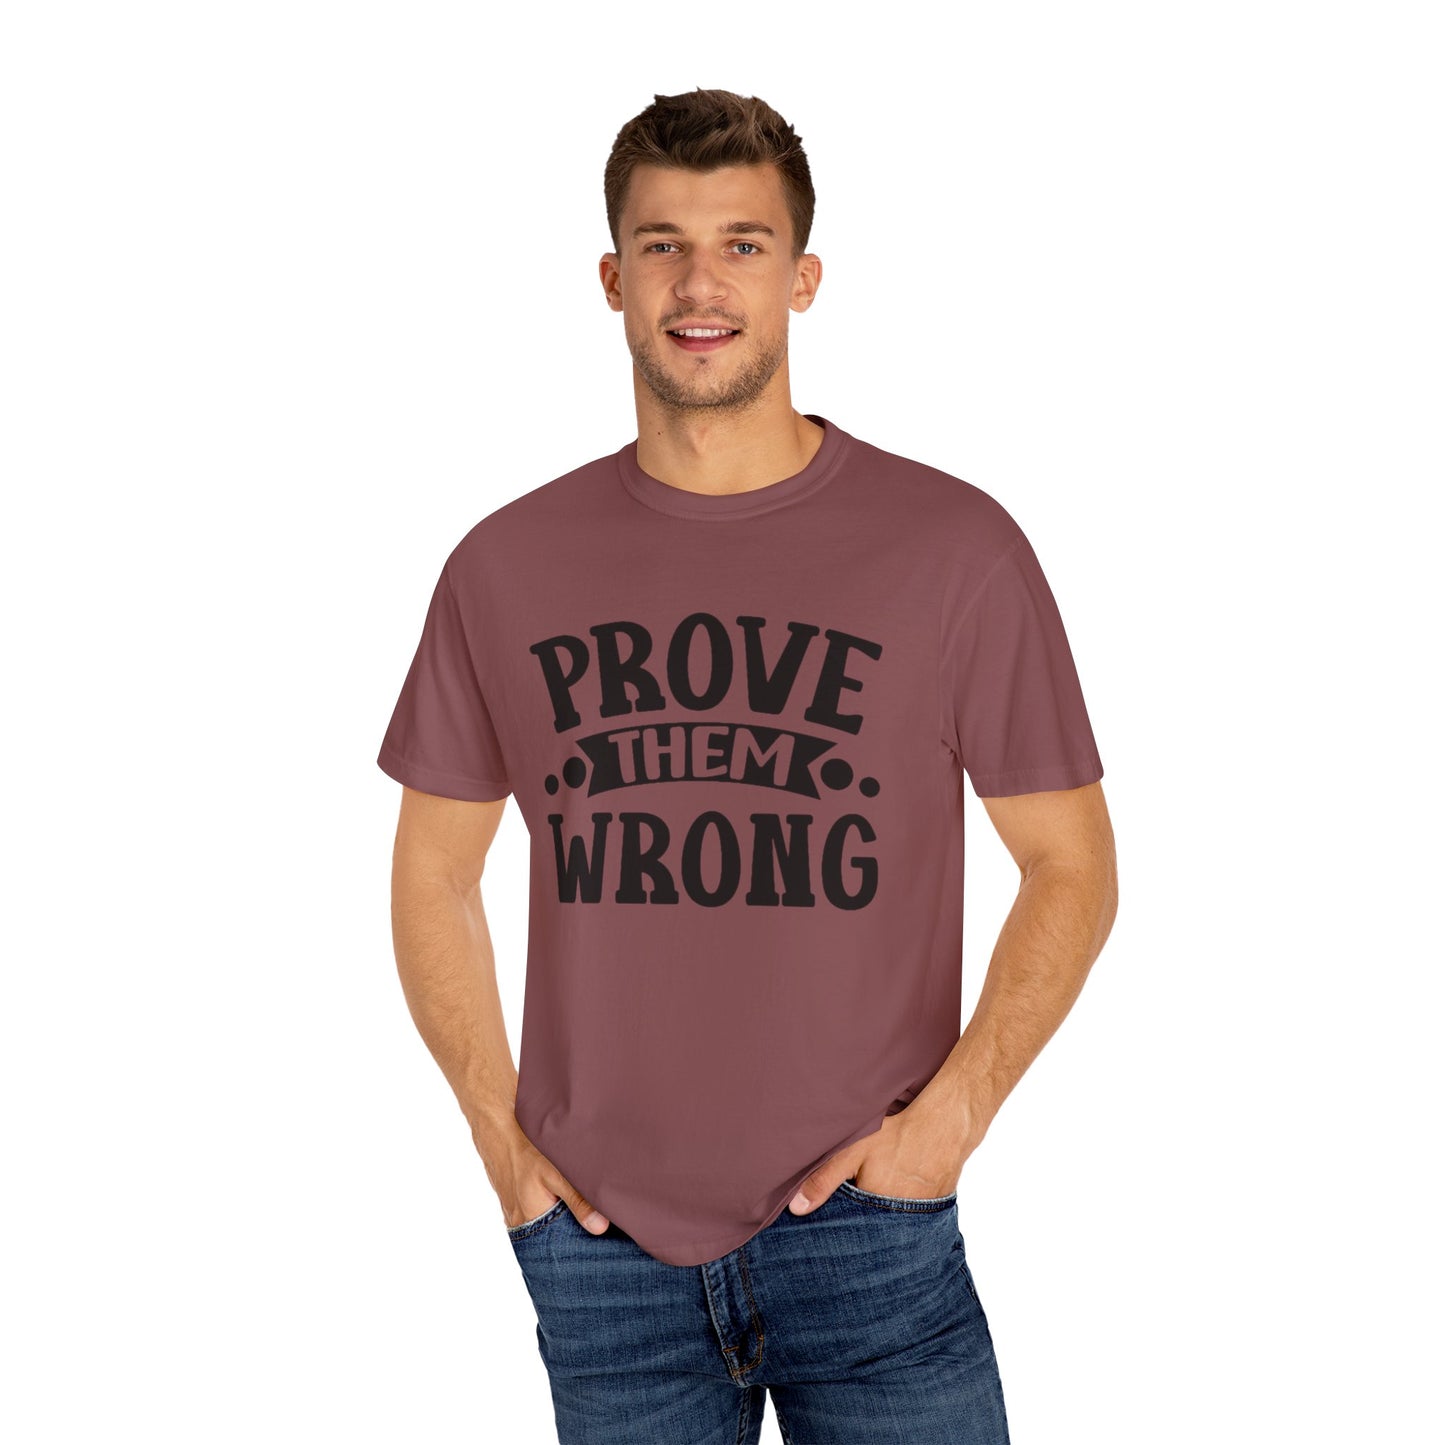 Prove them wrong- Unisex Garment-Dyed T-shirt